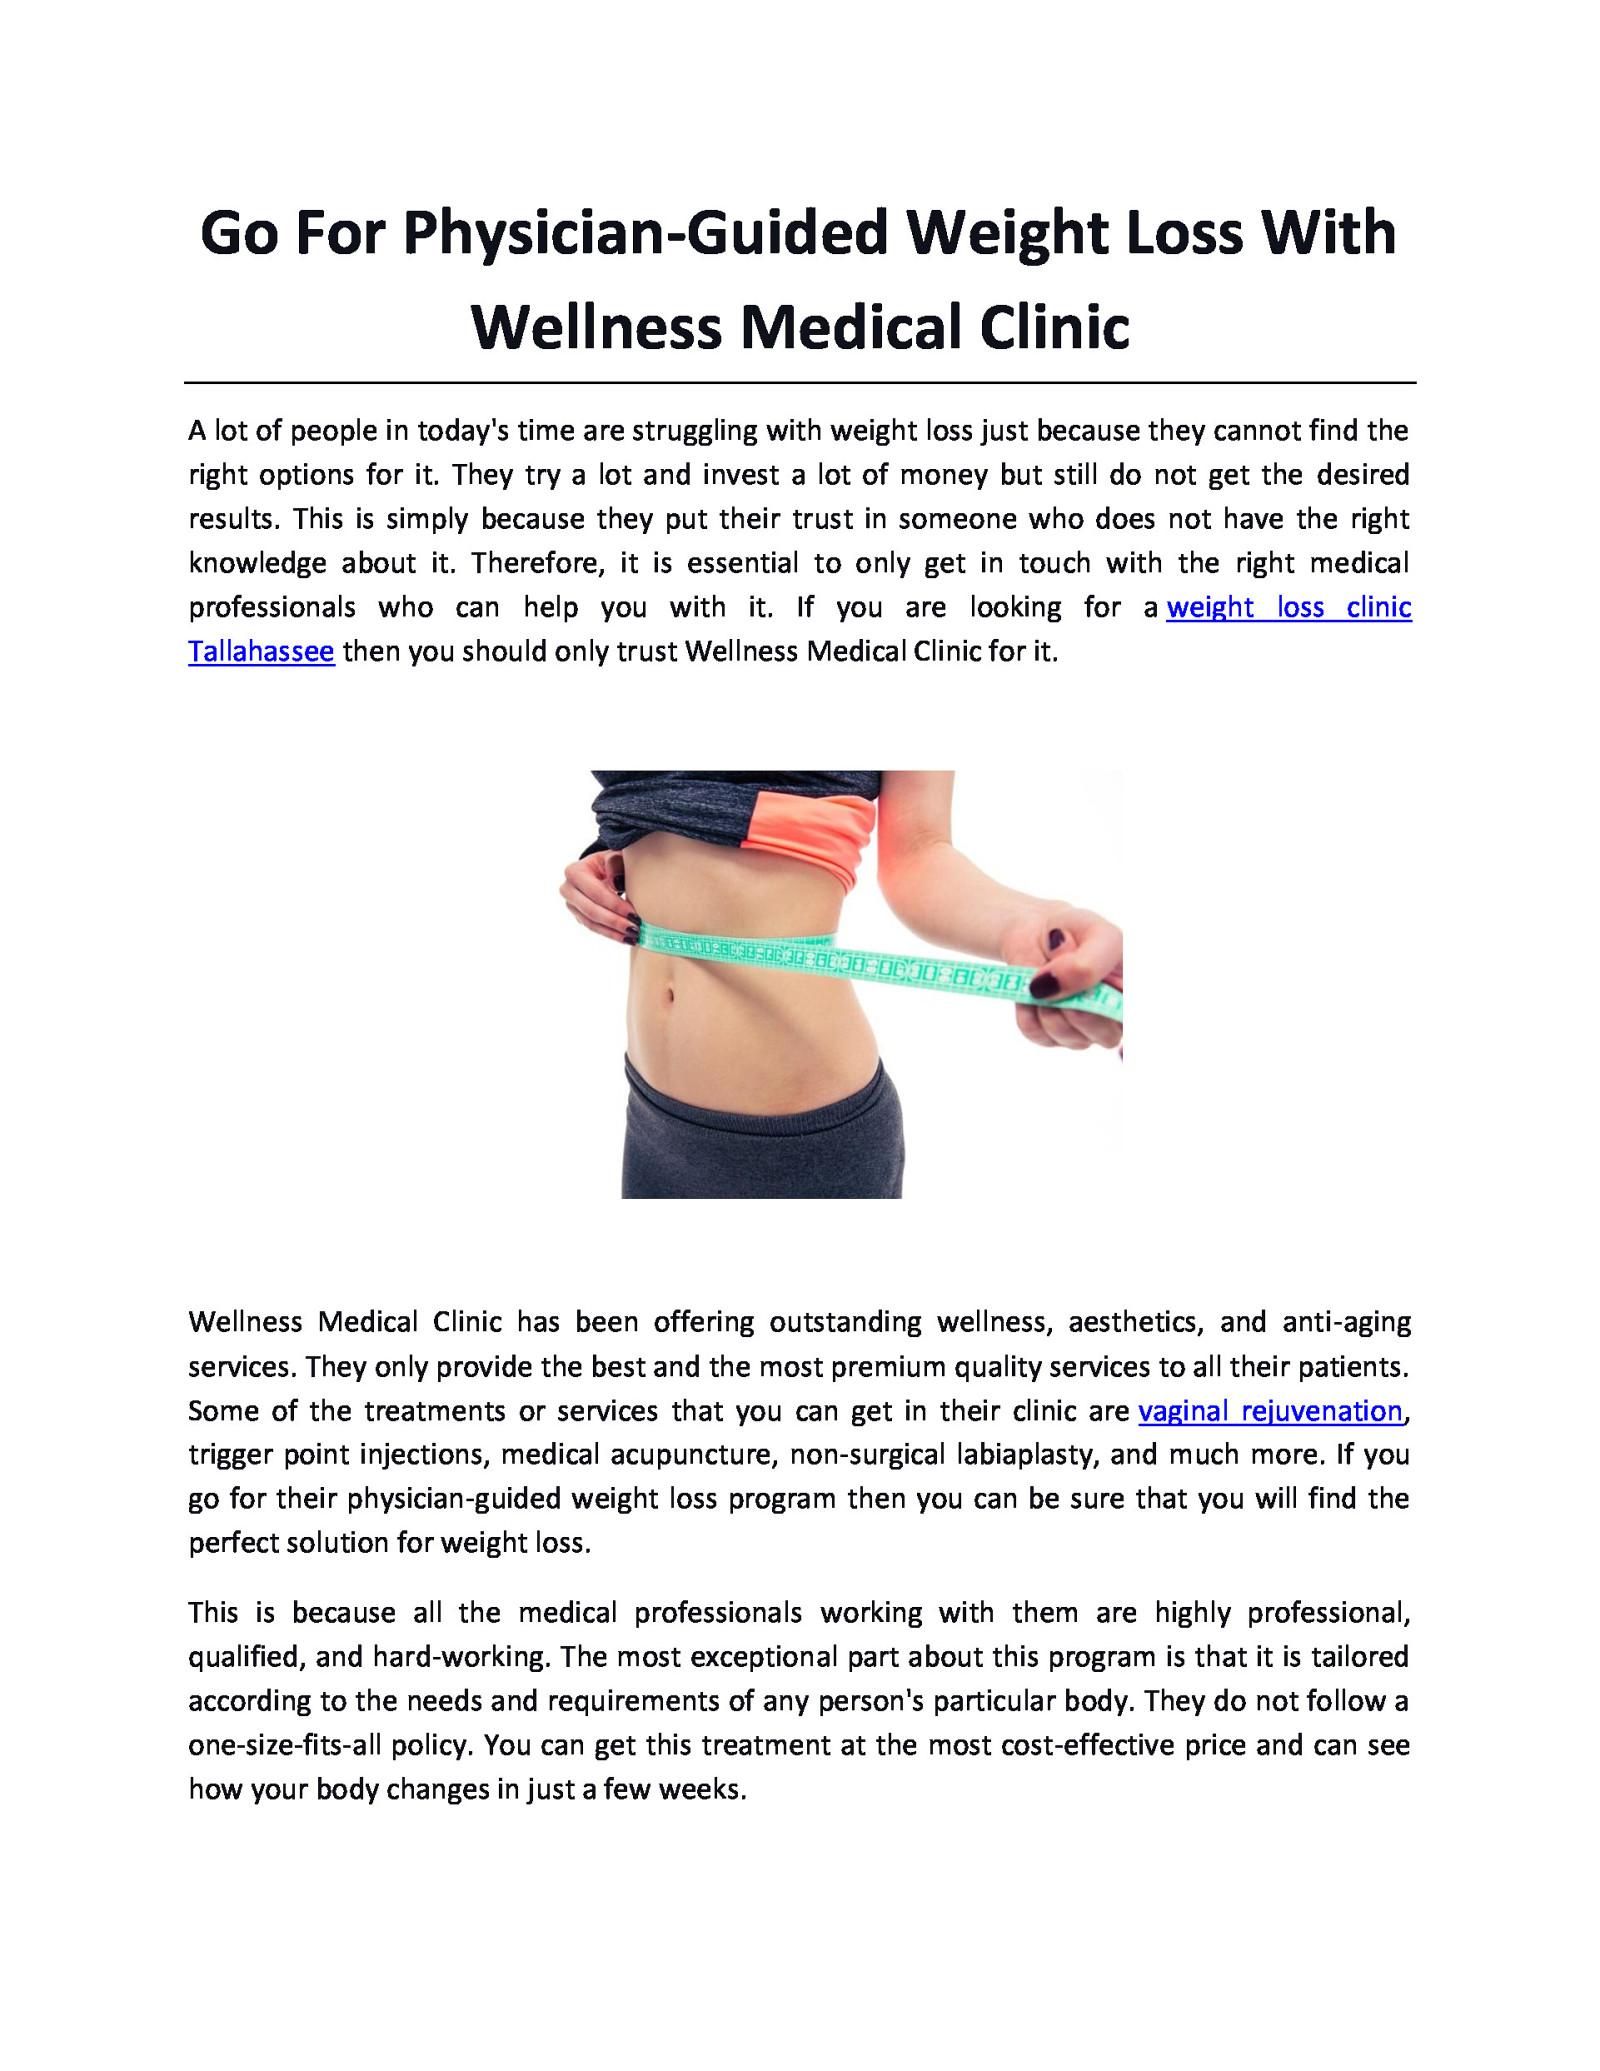 Go For Physician-Guided Weight Loss With Wellness Medical Clinic